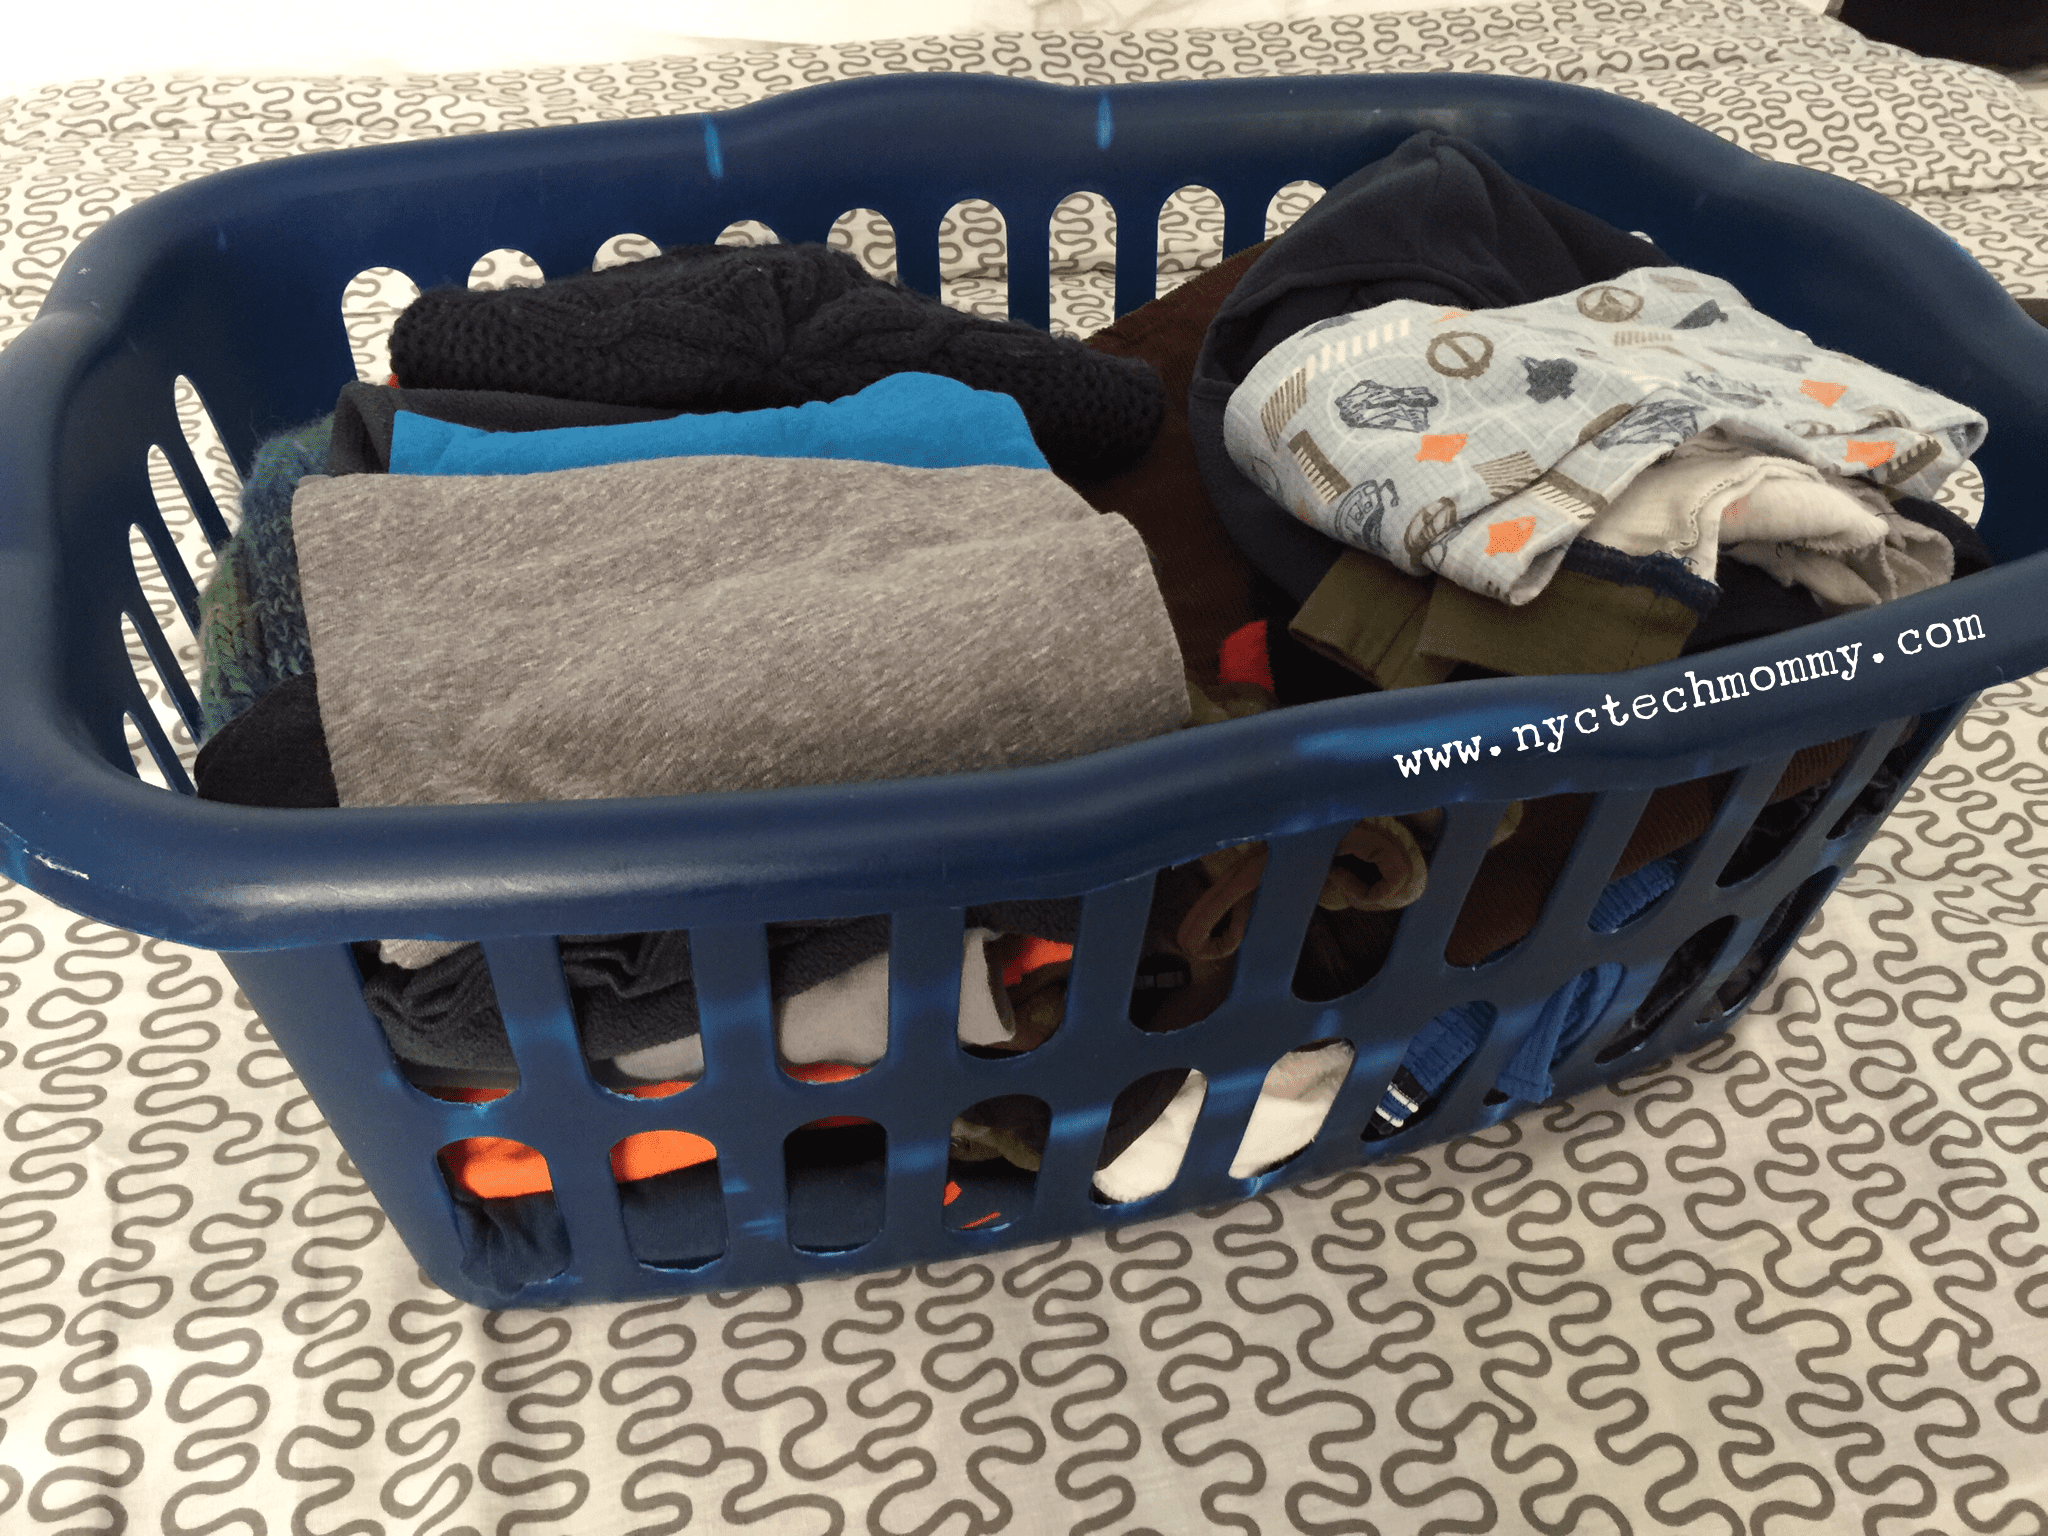 Family Road Trip Hack - Pack your kids stuff in a laundry basket! Our bellies and hearts are definitely full after spending the long Thanksgiving weekend enjoying family, delicious food, beautiful sights, a little Black Friday shopping and a memorable family road trip in the 2016 Buick Enclave.